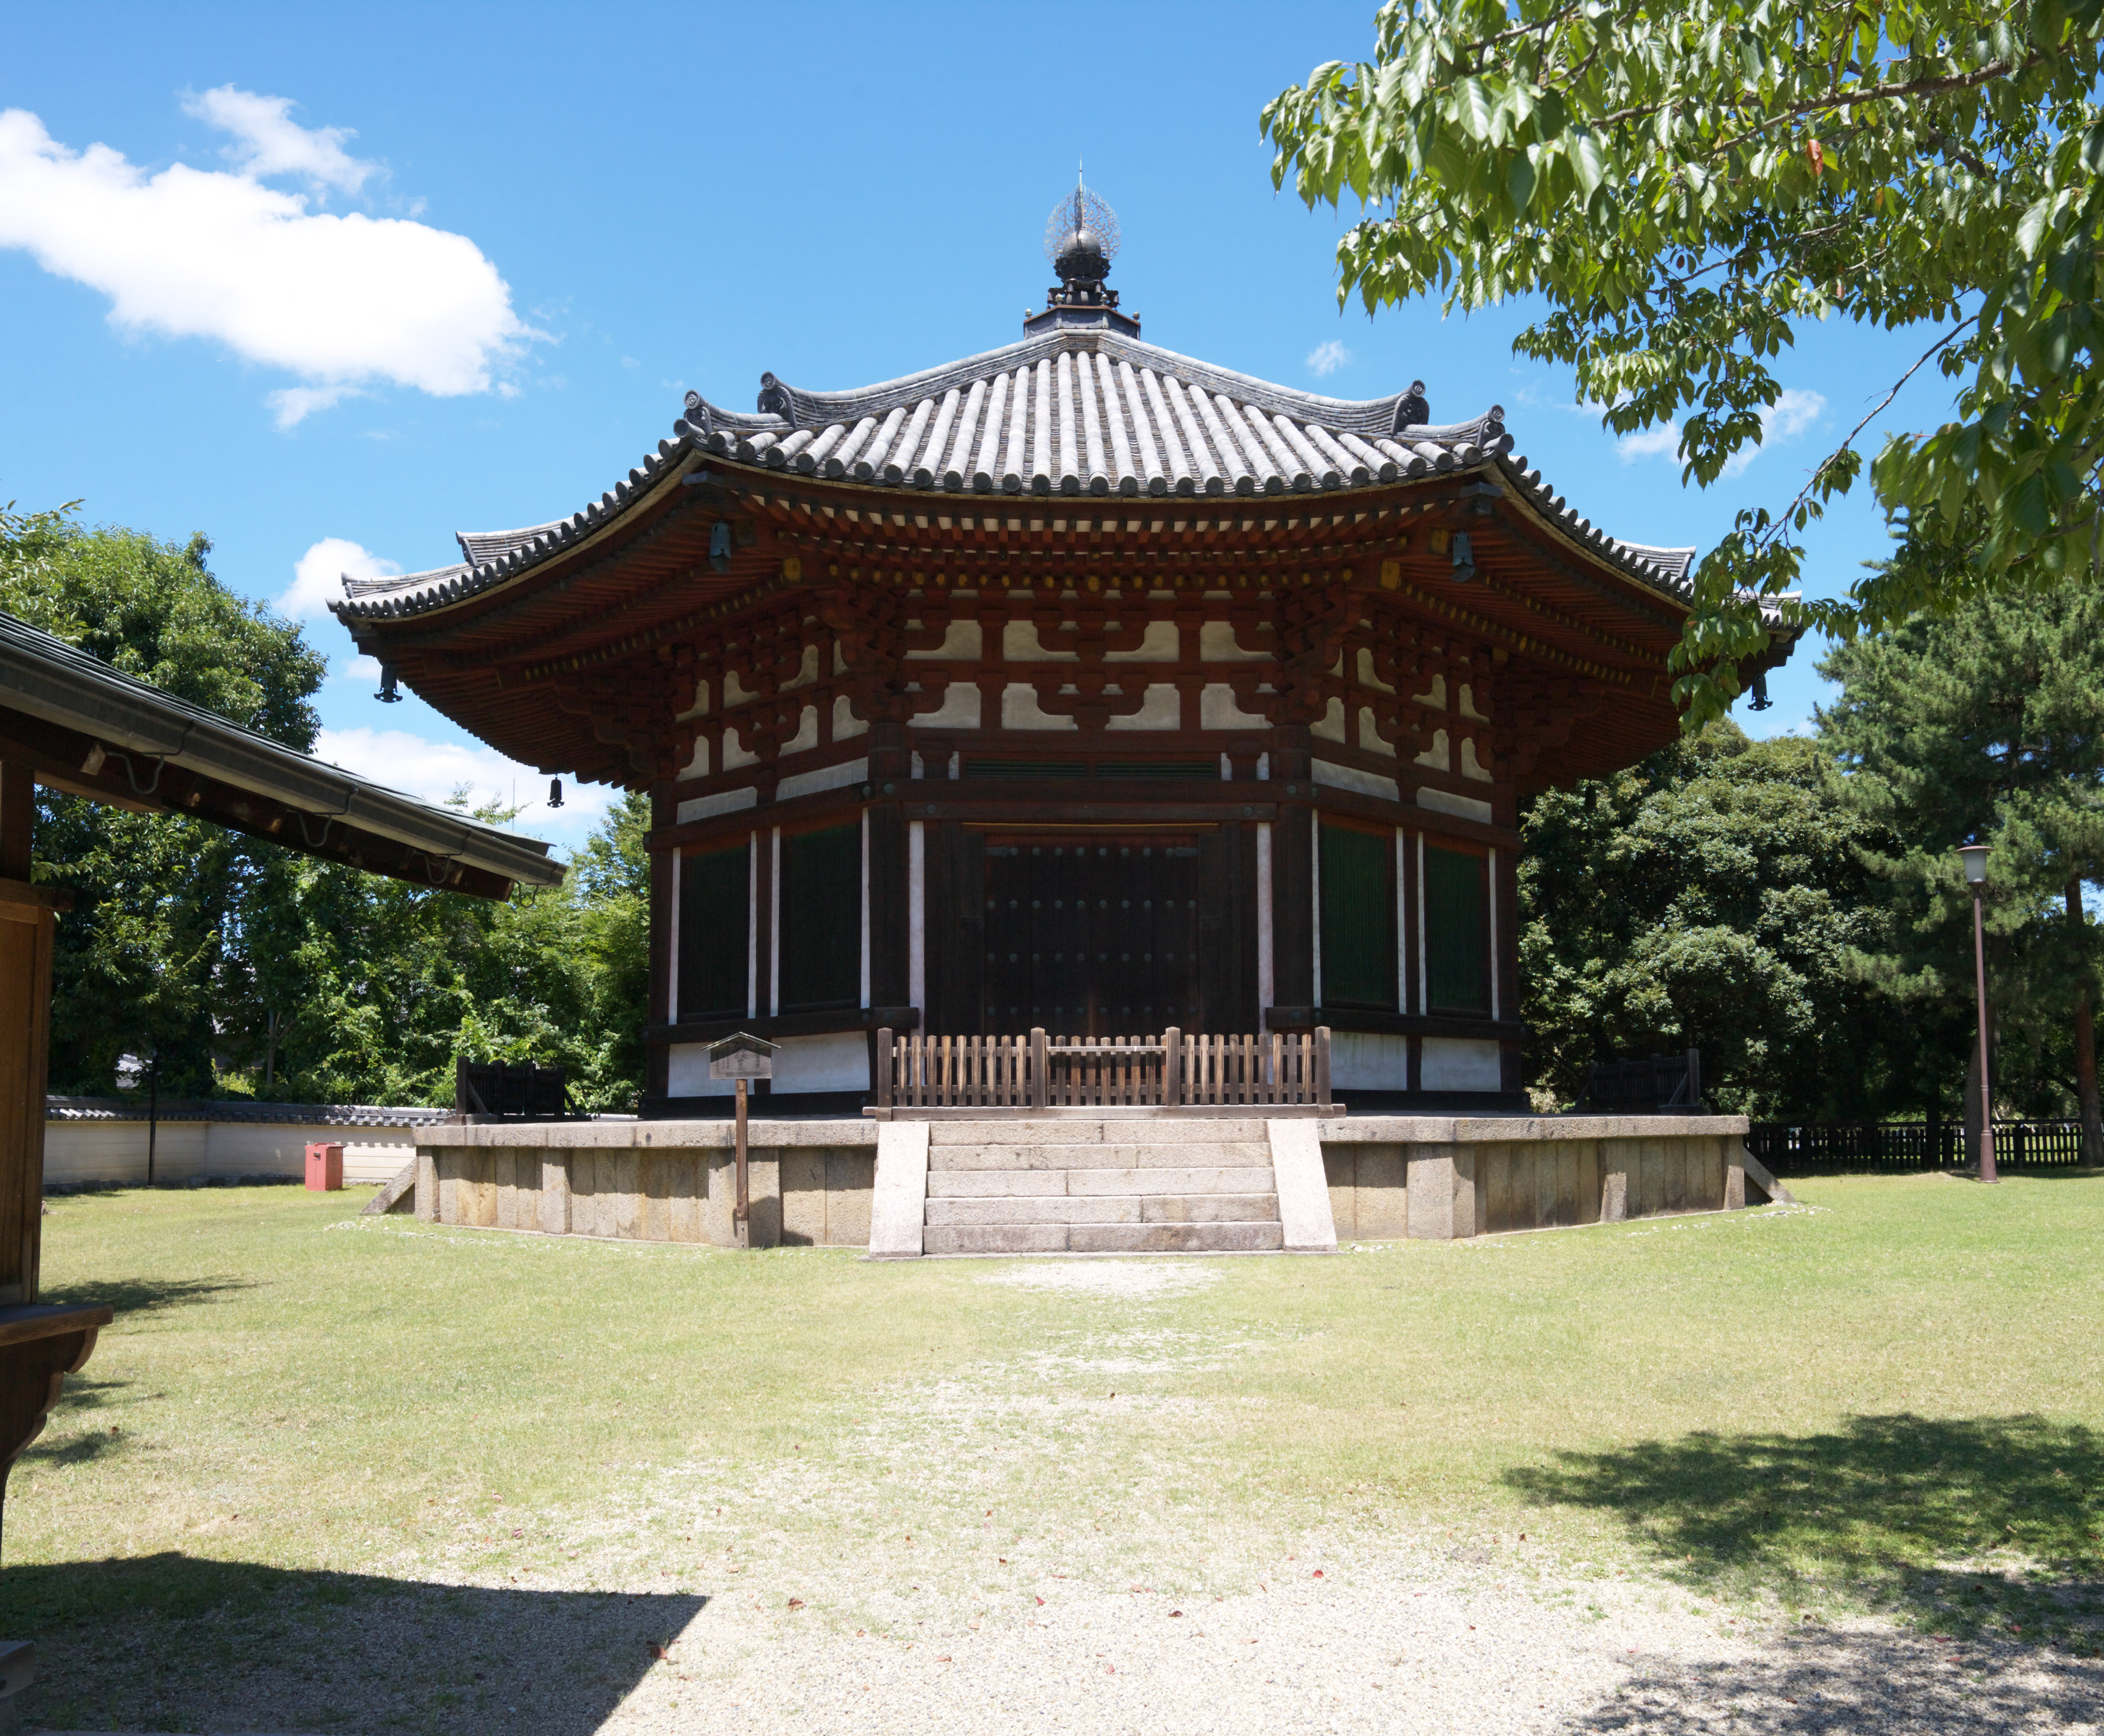 photo,material,free,landscape,picture,stock photo,Creative Commons,Kofuku-ji Temple north hexagonal building Togane temple, Buddhism, wooden building, roof, world heritage